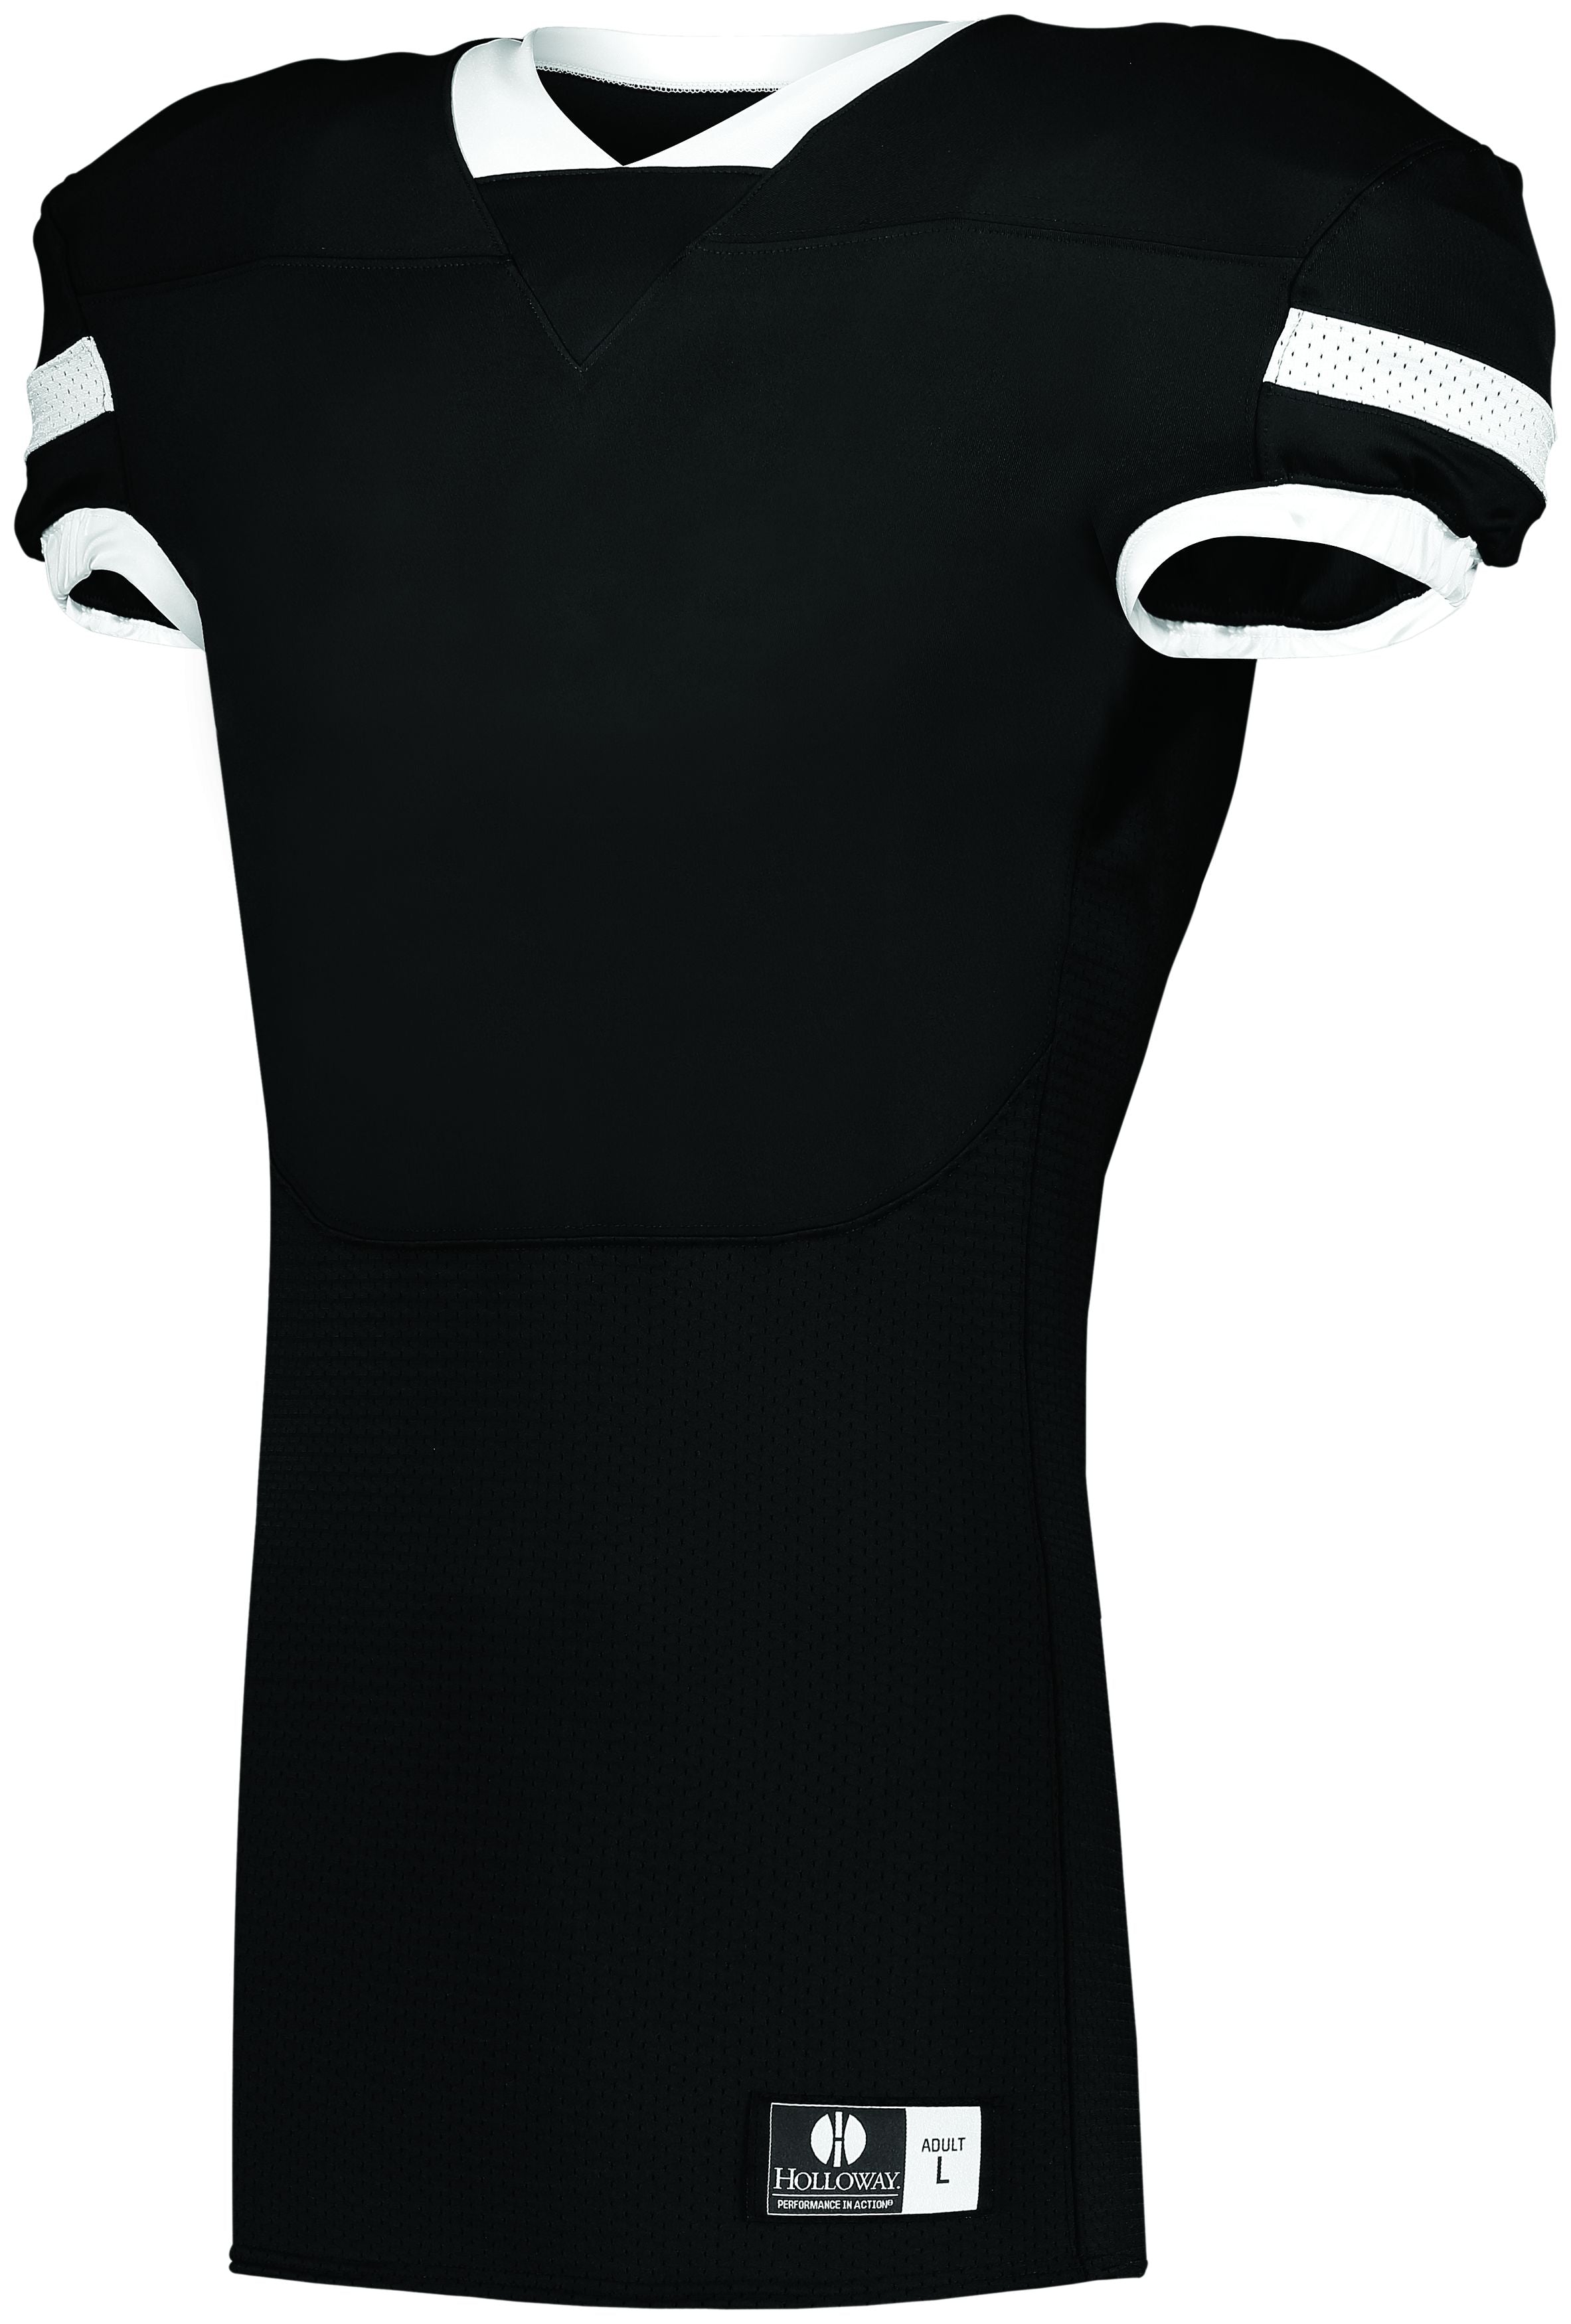 A4 Youth All Porthole Practice Jersey